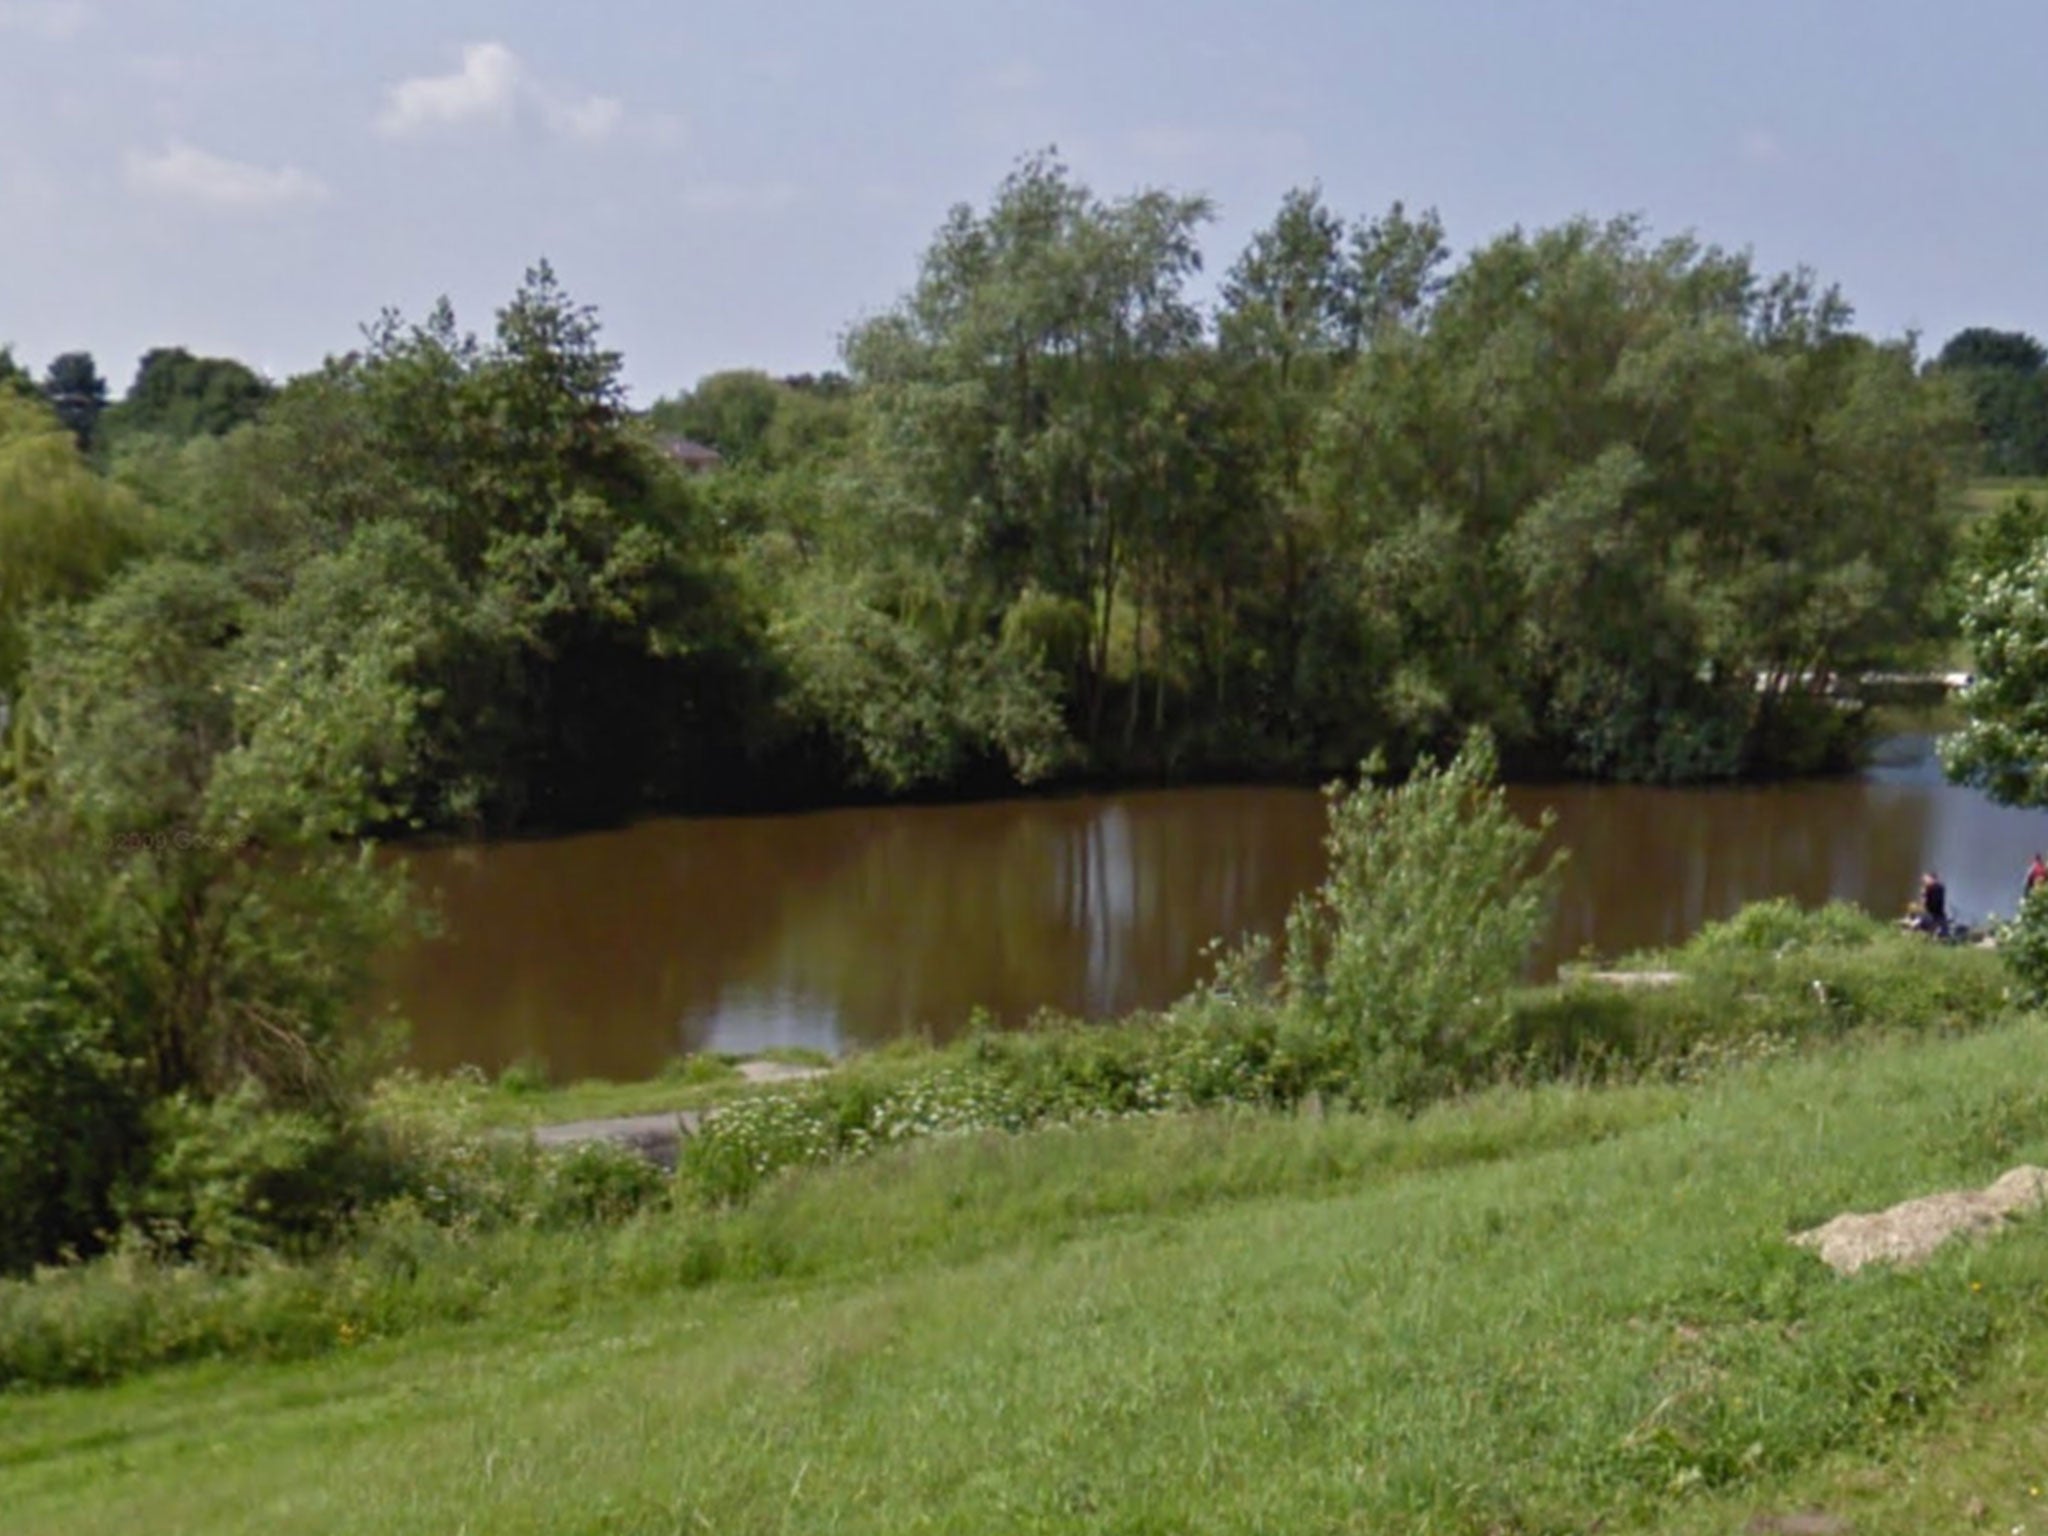 The alleged incident took place at Mill Dam Park, Kirkby